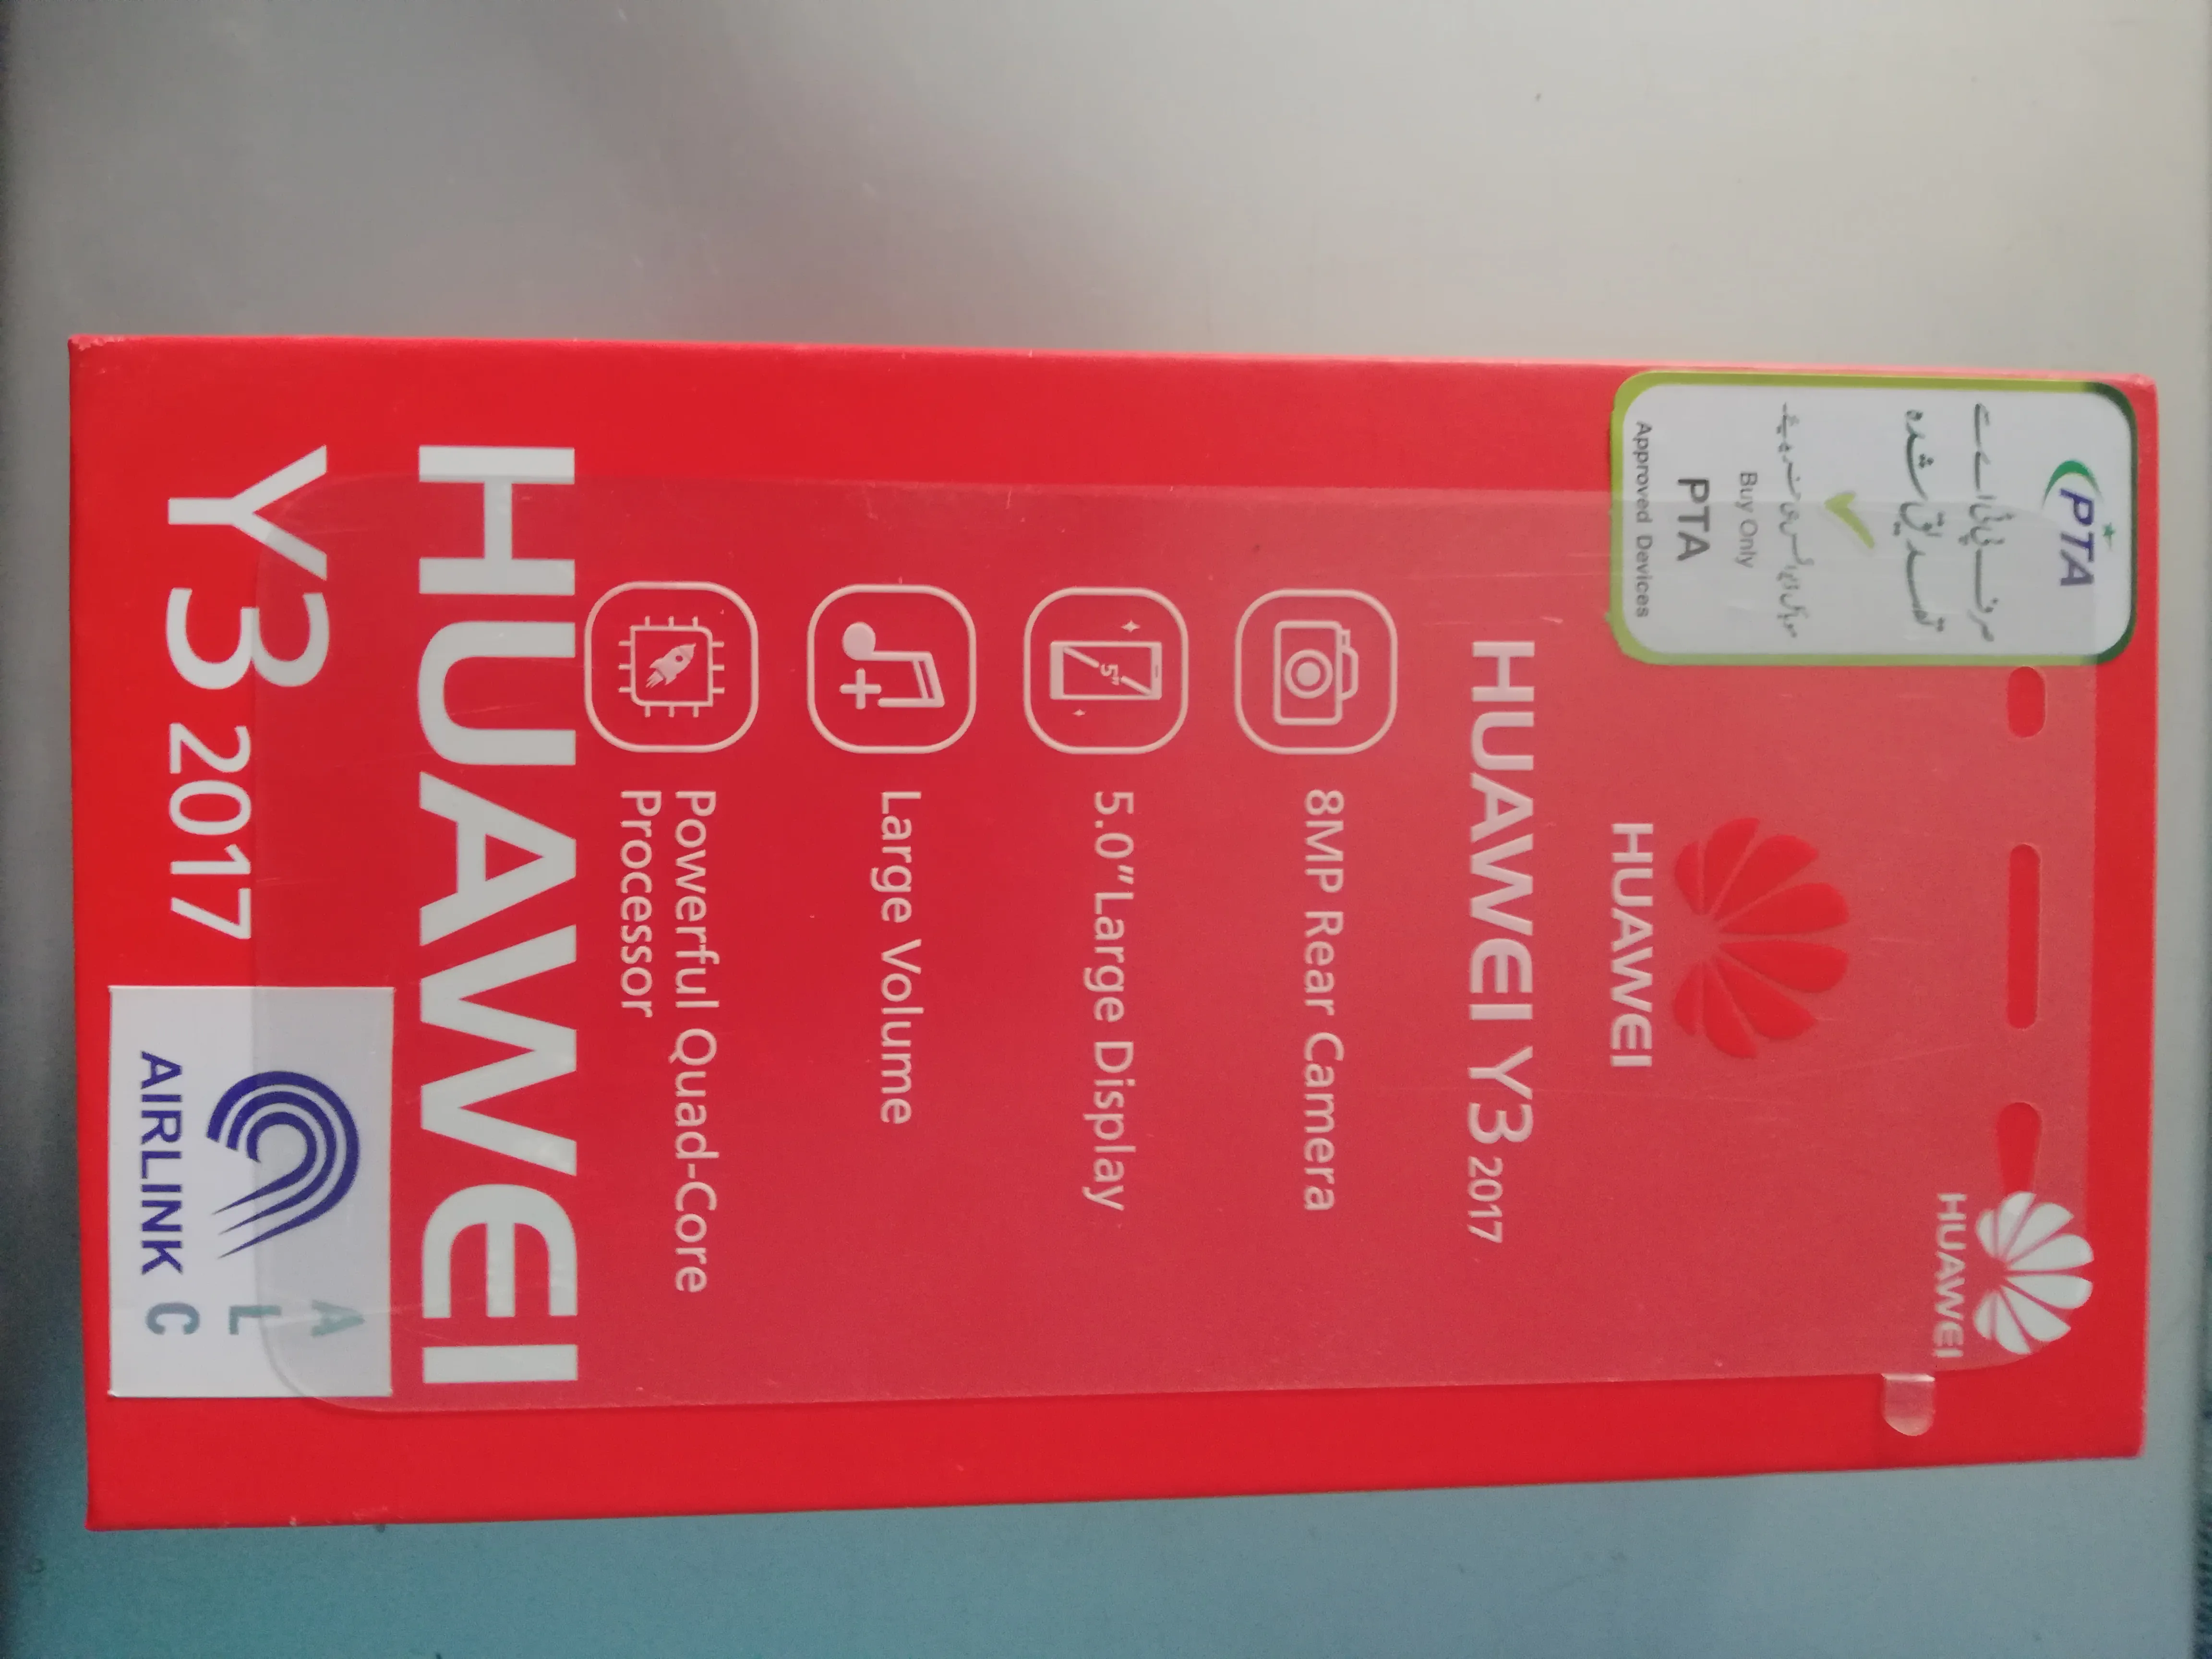 Huawei Y3 2017 for sale 10/10 with 6 months warranty - photo 1